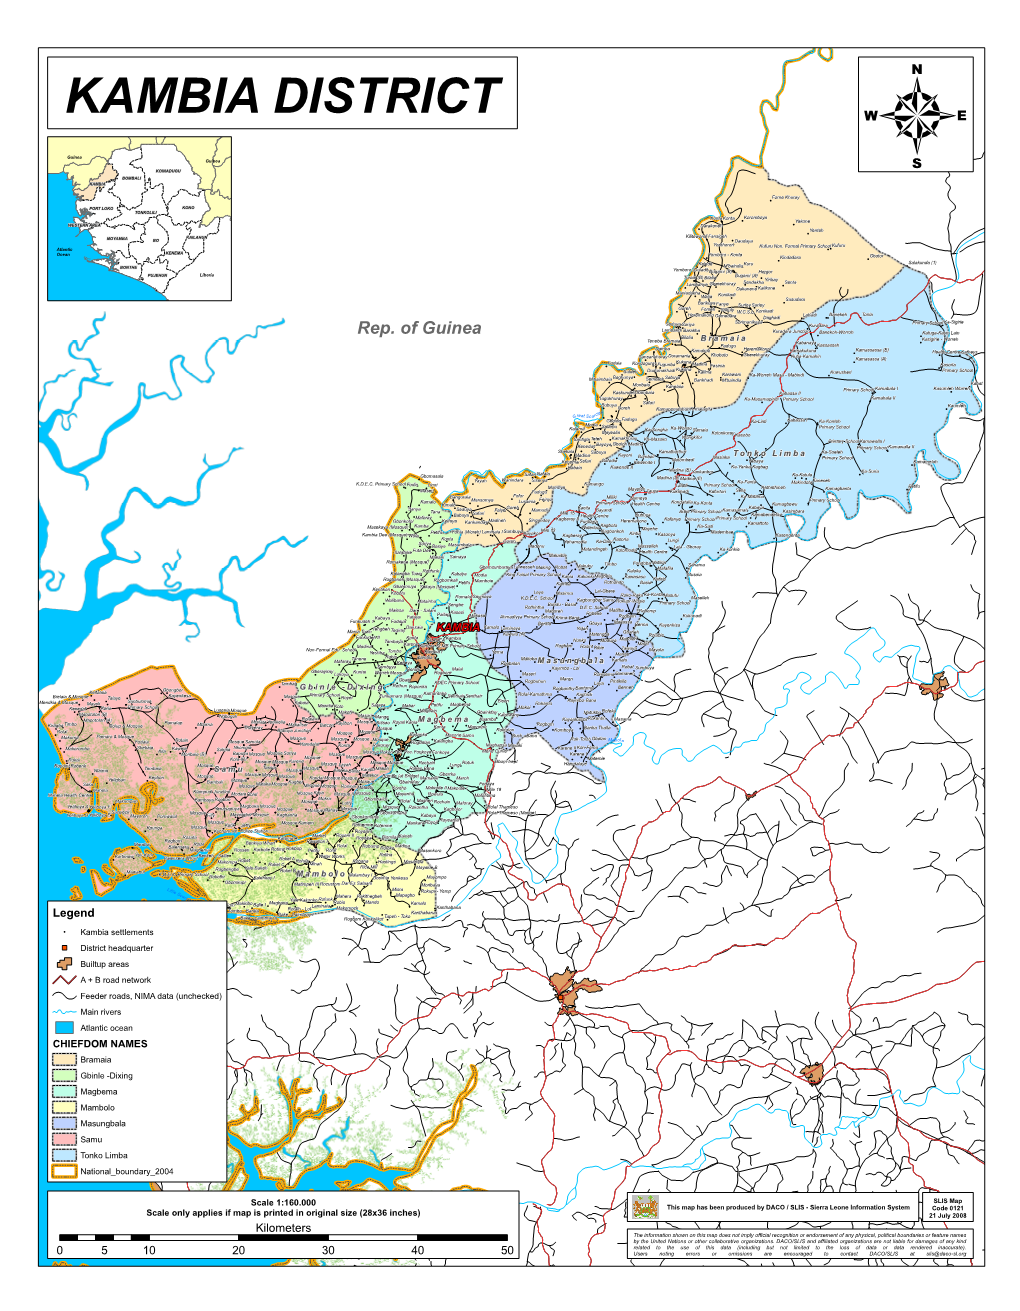 Download Pdf of Kambia District